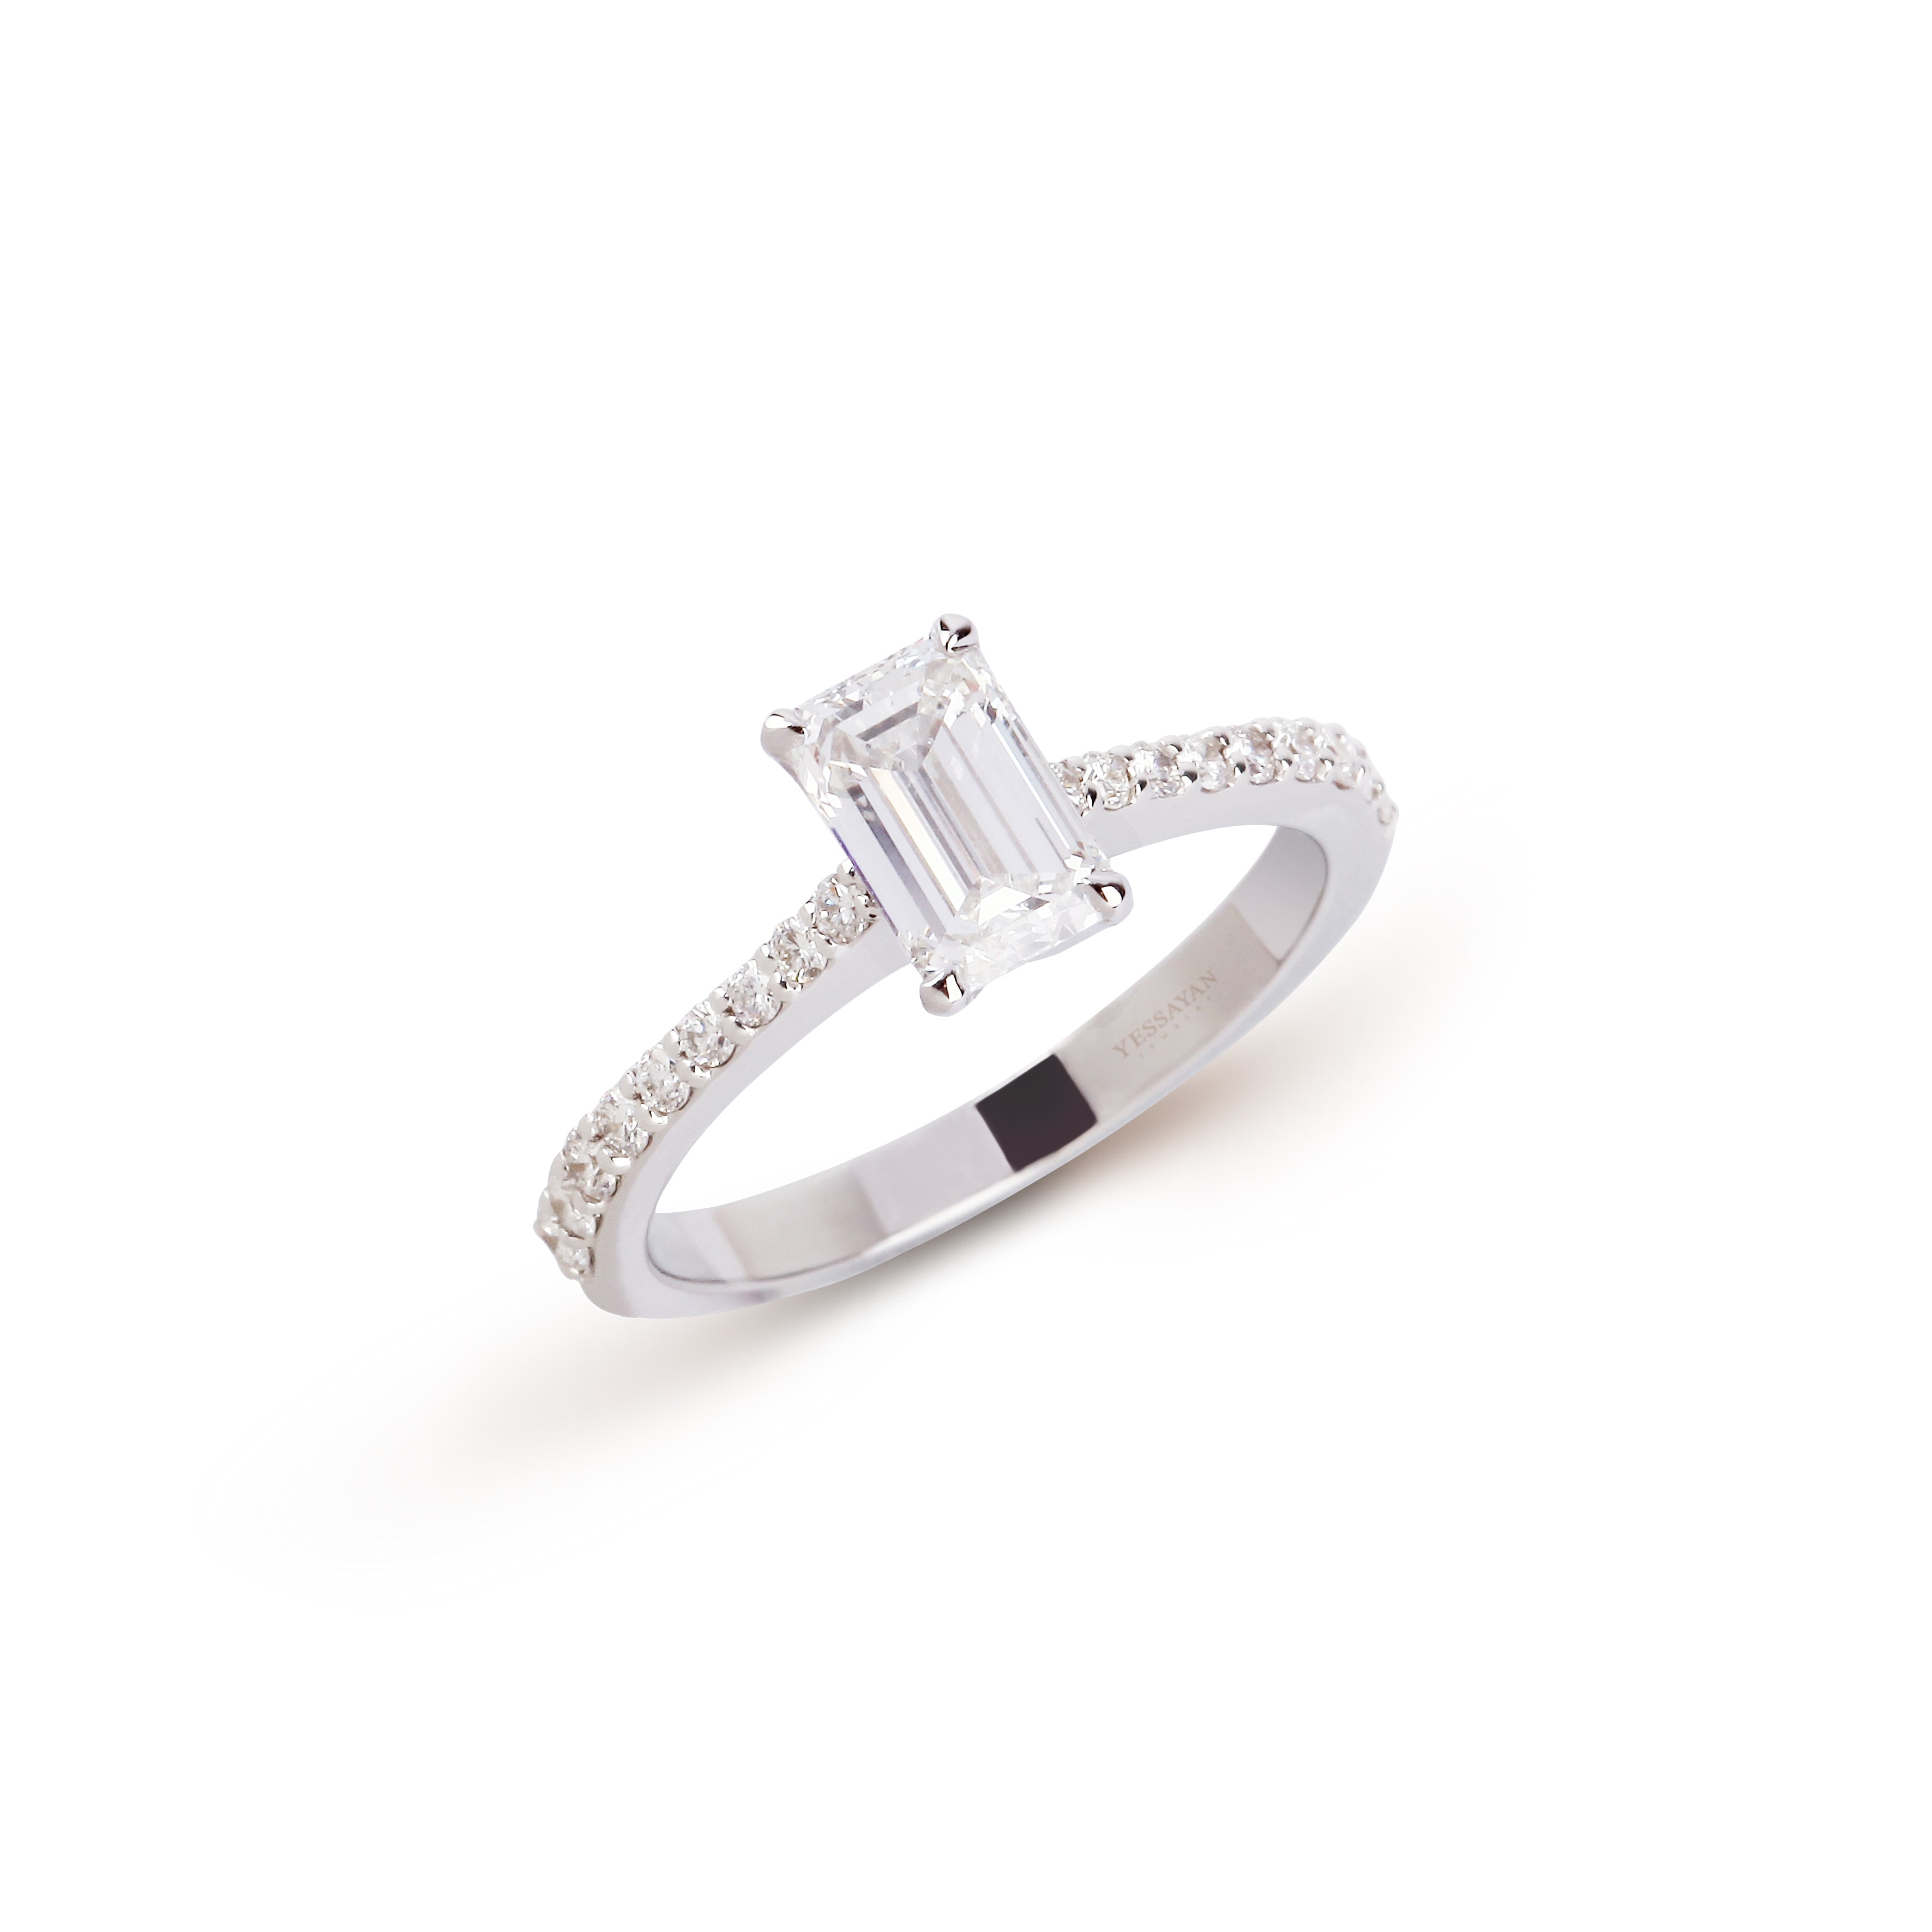 Baguette Solitaire Diamond Ring | Best jewelry stores in UAE | Jewelry store in Saudi Arabia